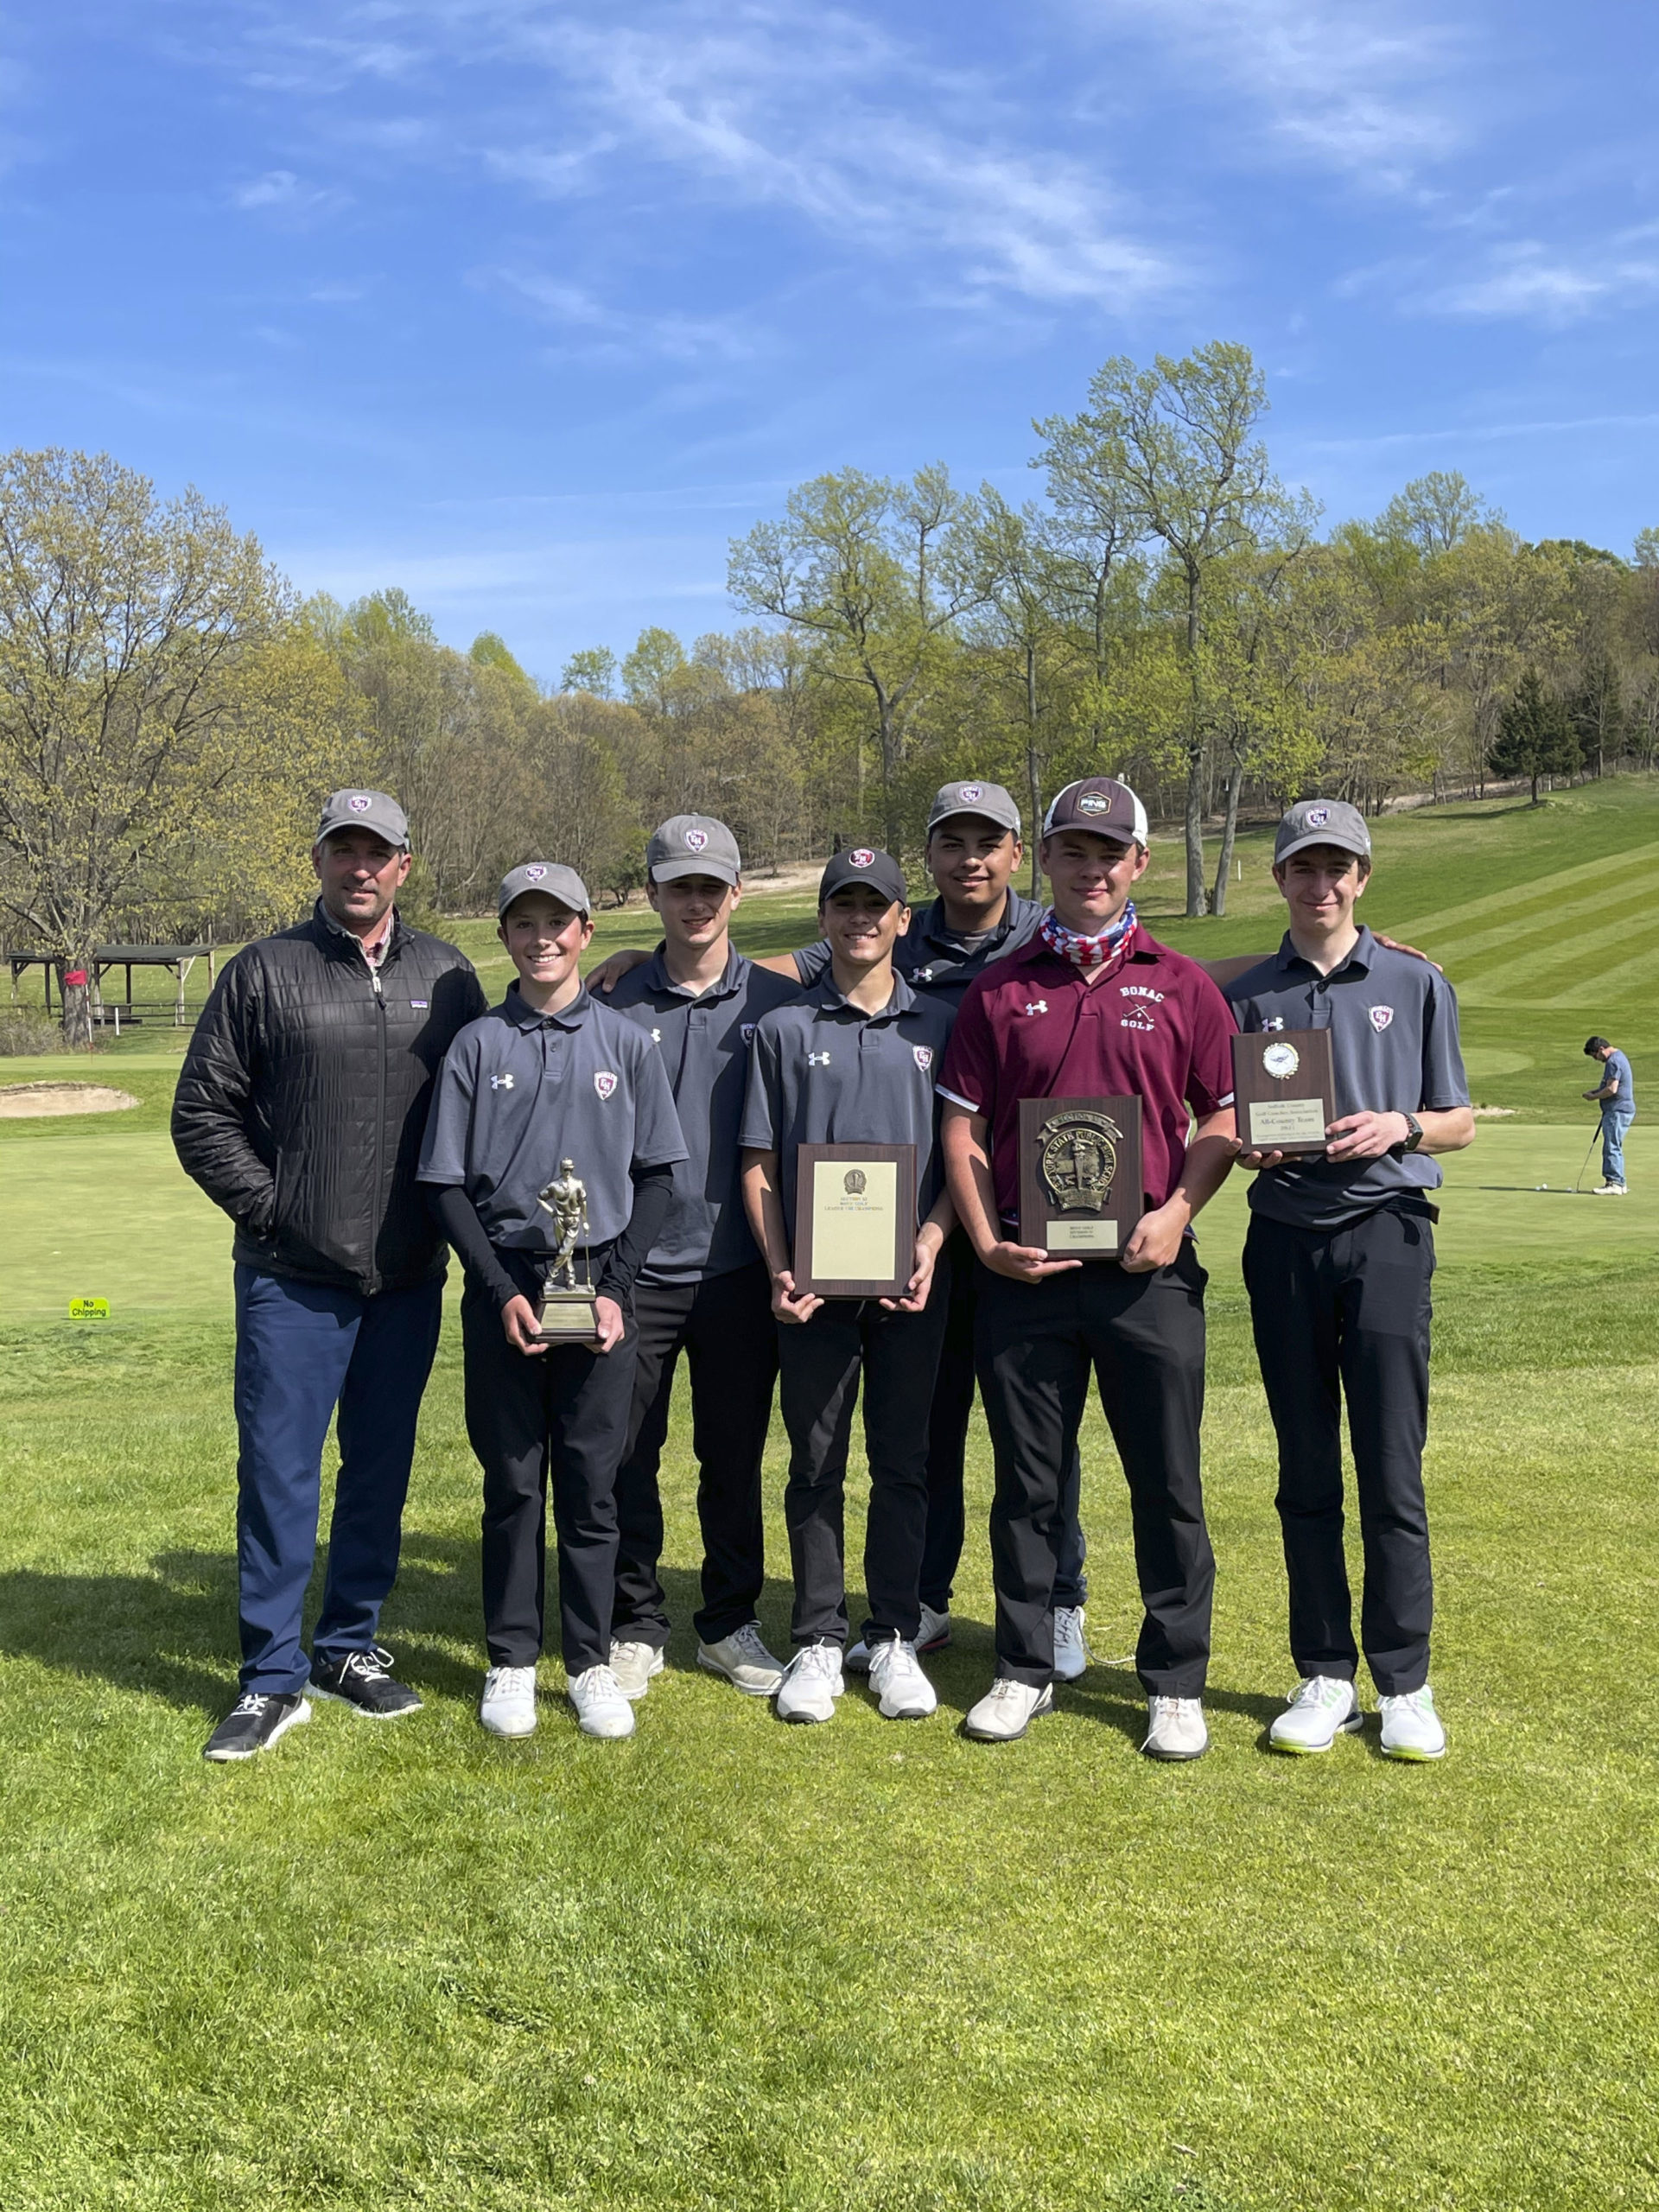 The East Hampton boys golf team placed third at the Suffolk County Championships last week, led by freshman James Bradley, who won the individual title.